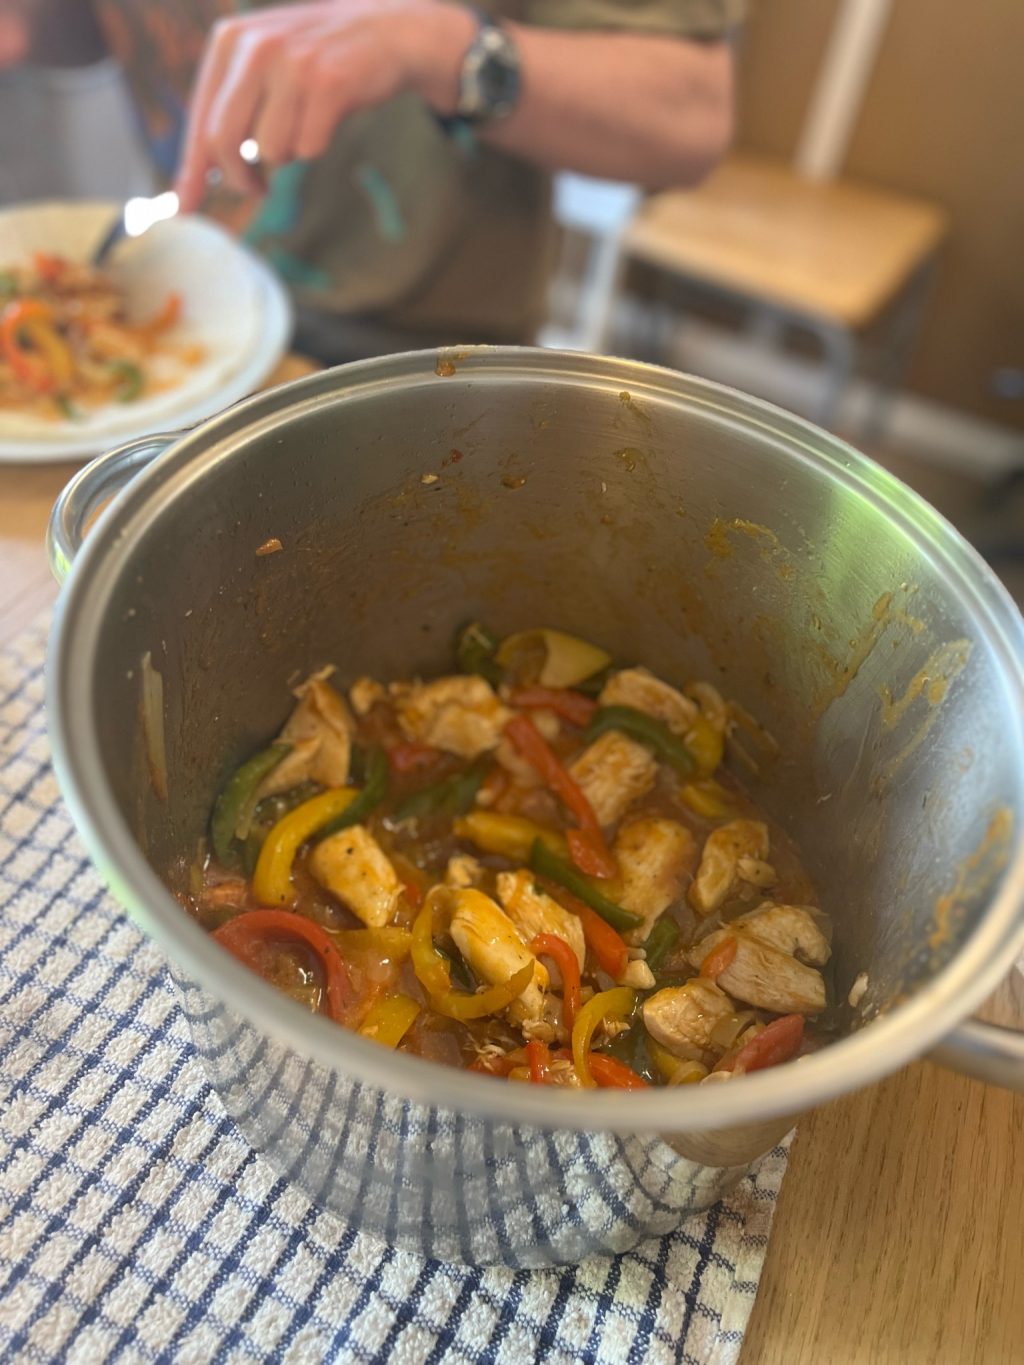 A pot of chicken and vegetables at the dinner table.